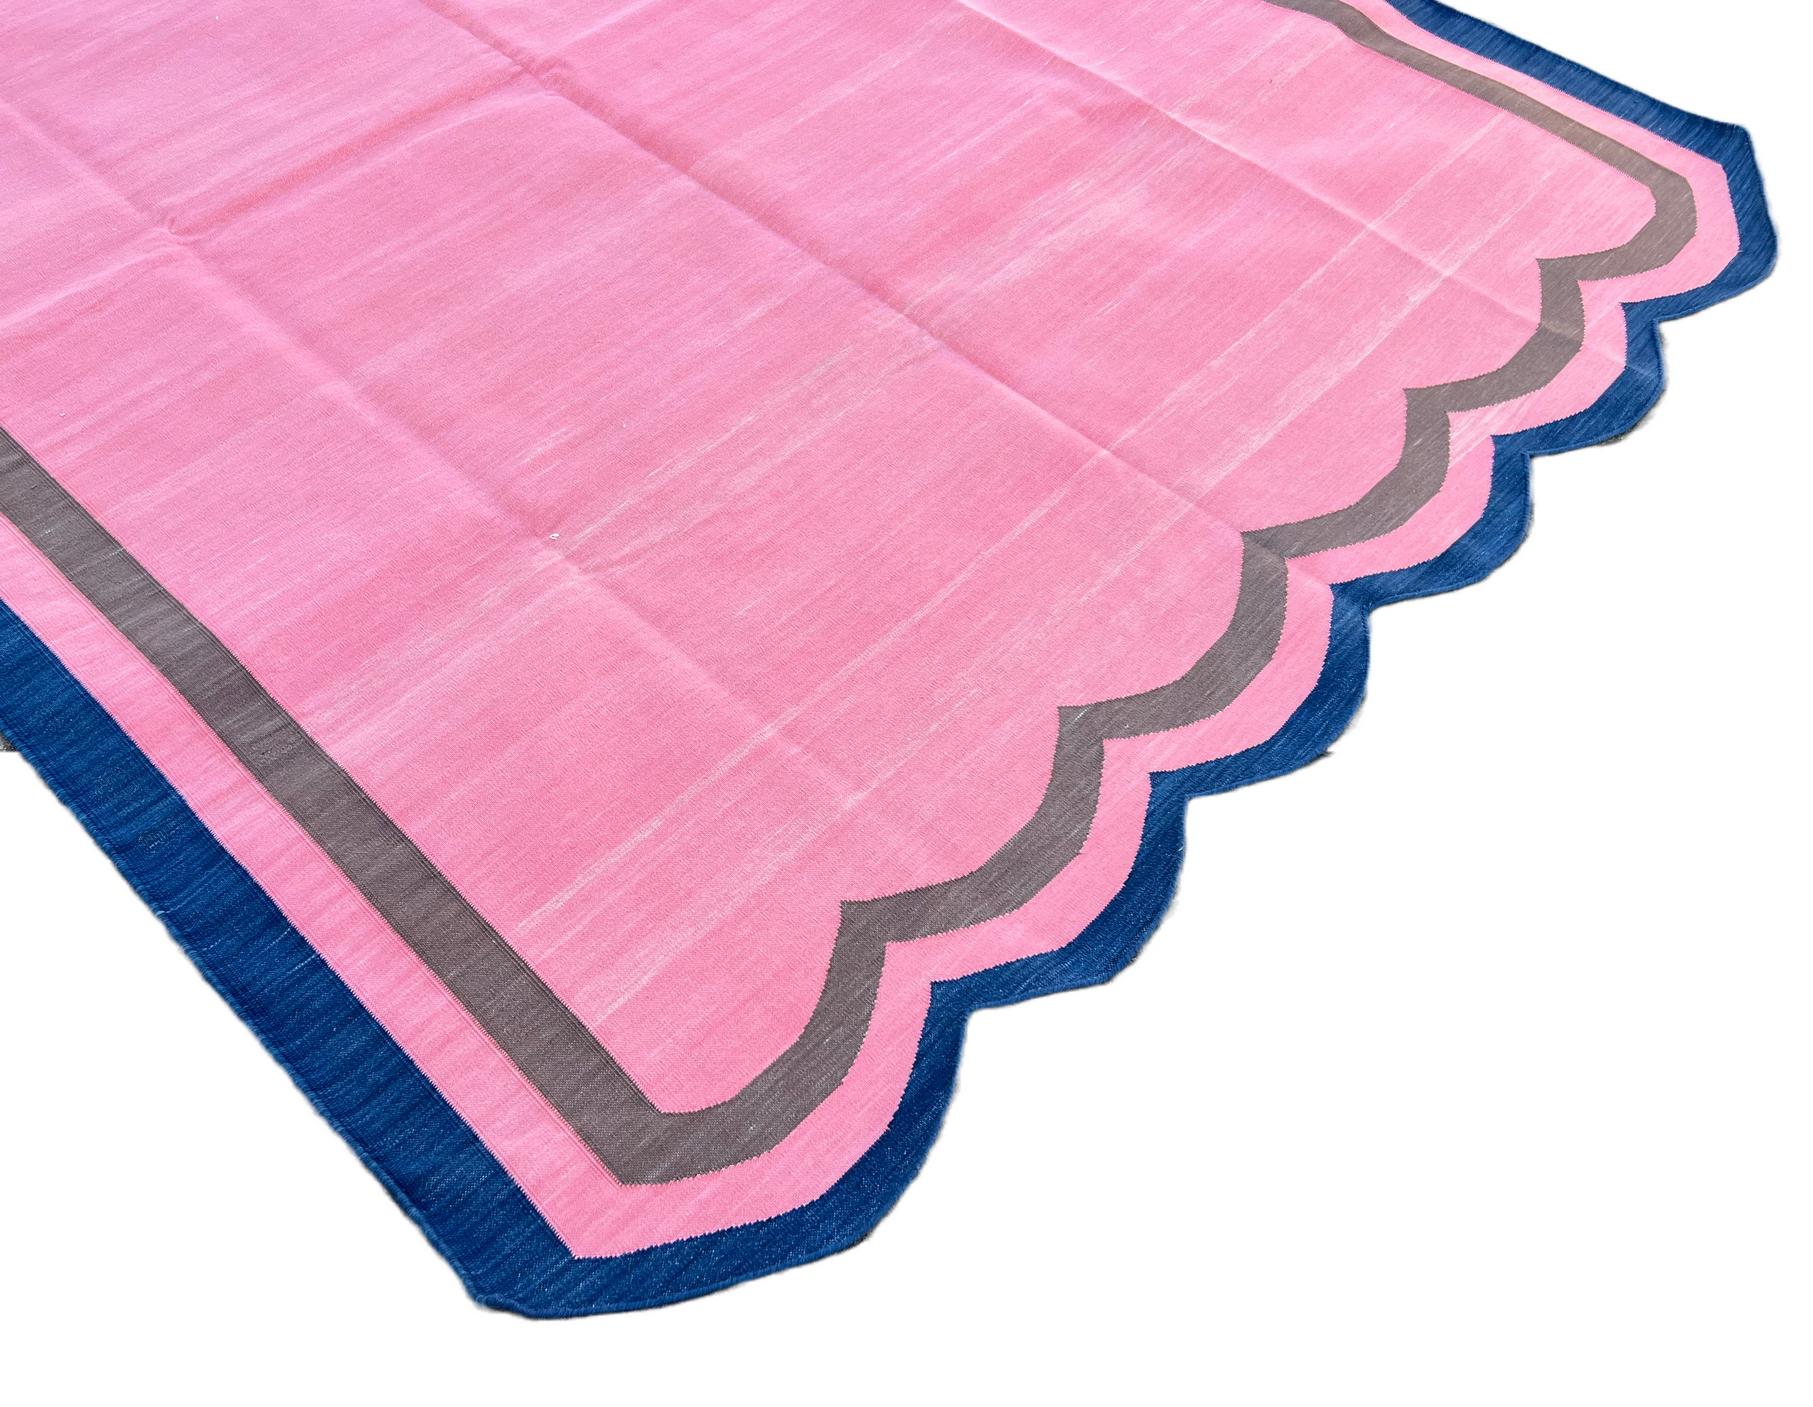 Indian Handmade Cotton Area Flat Weave Rug, 6x8 Pink And Blue Scalloped Striped Dhurrie For Sale